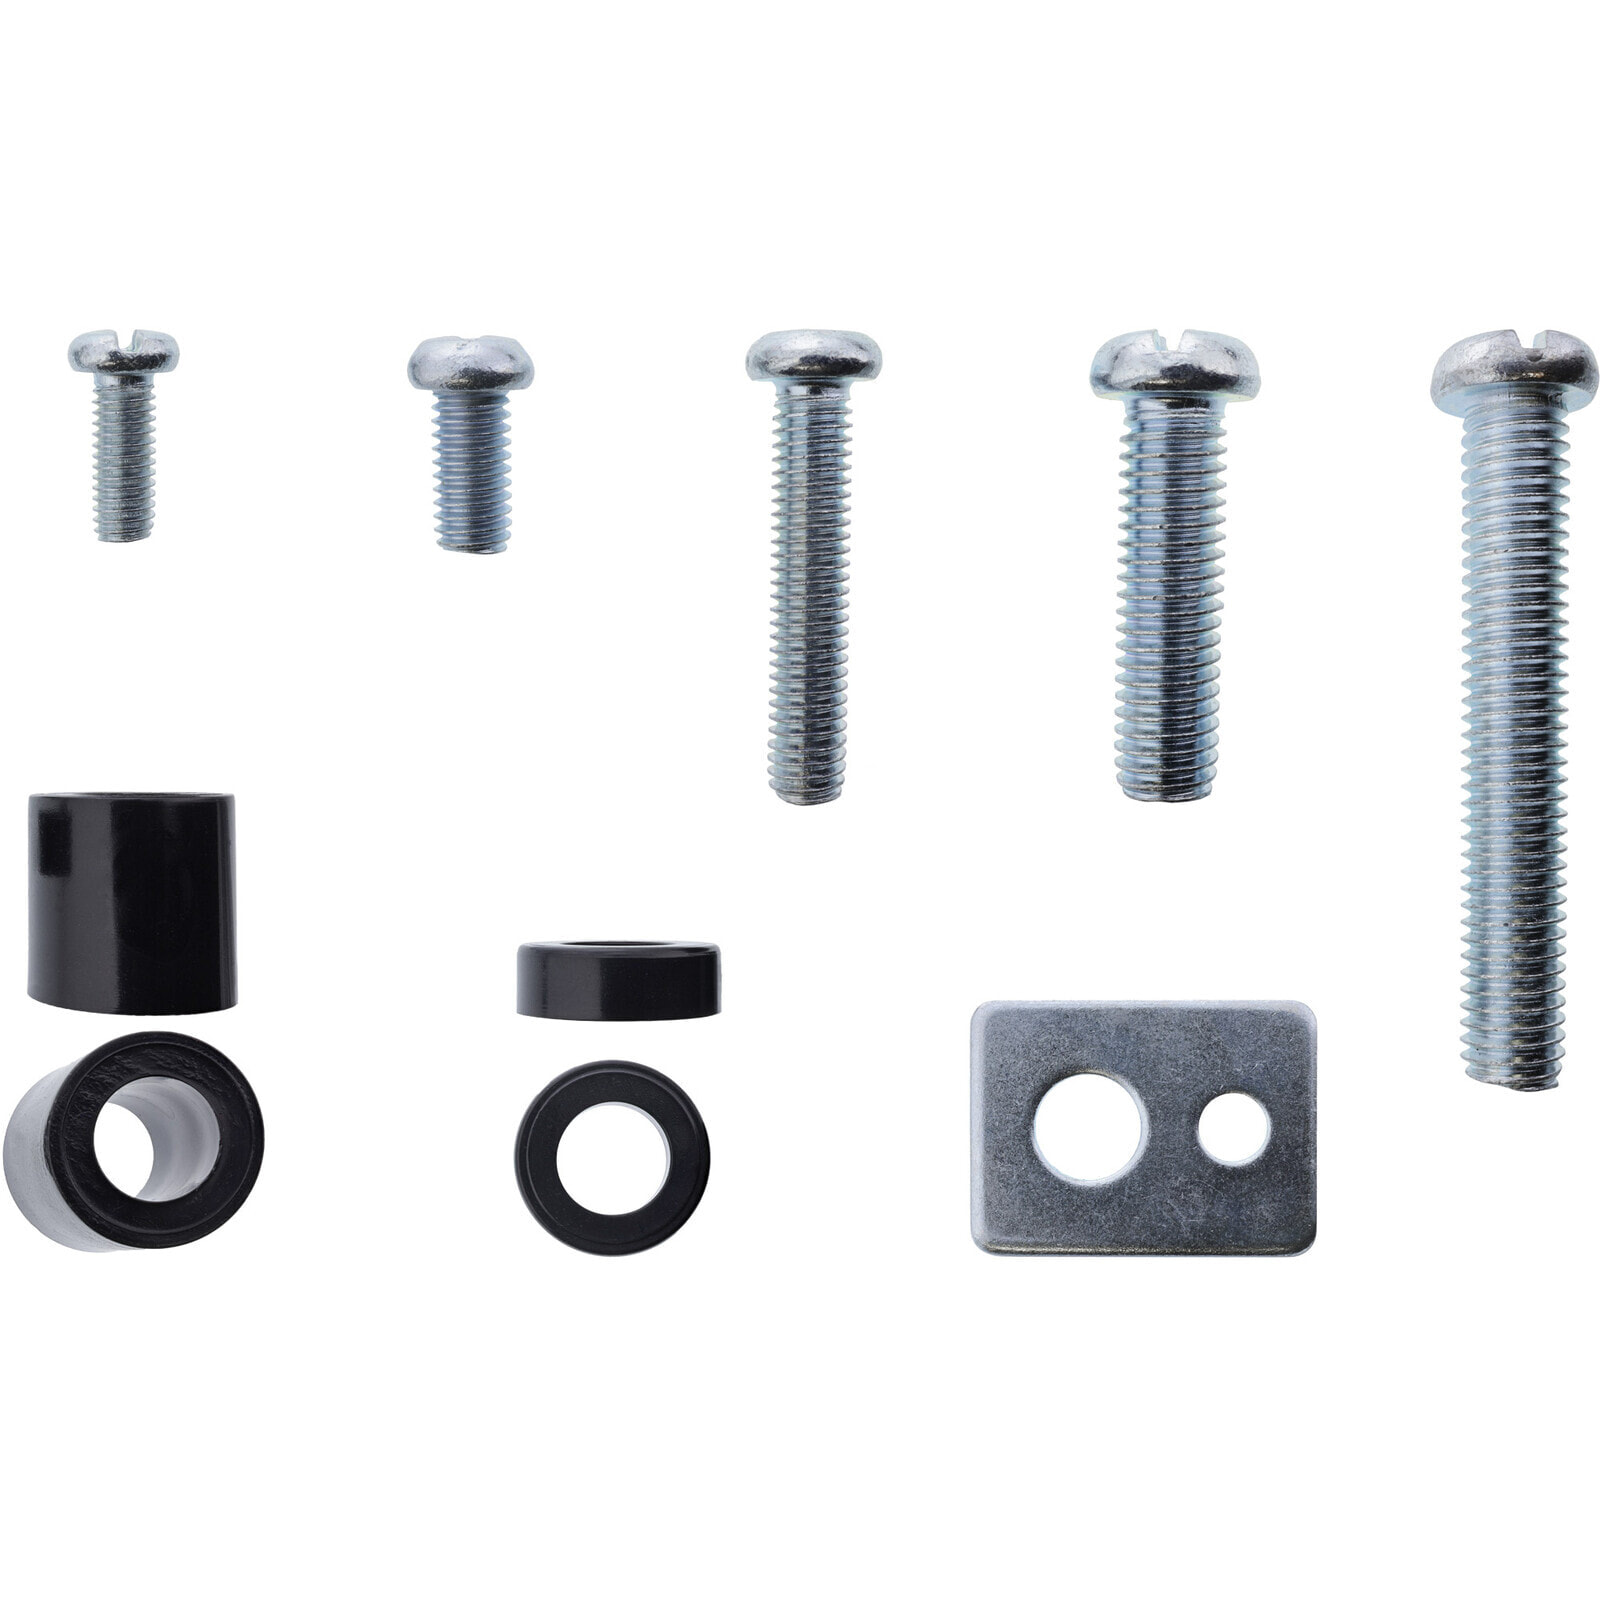 Screw set 40 pieces for TV wall mount - Wall - Zinc - 40 pc(s)